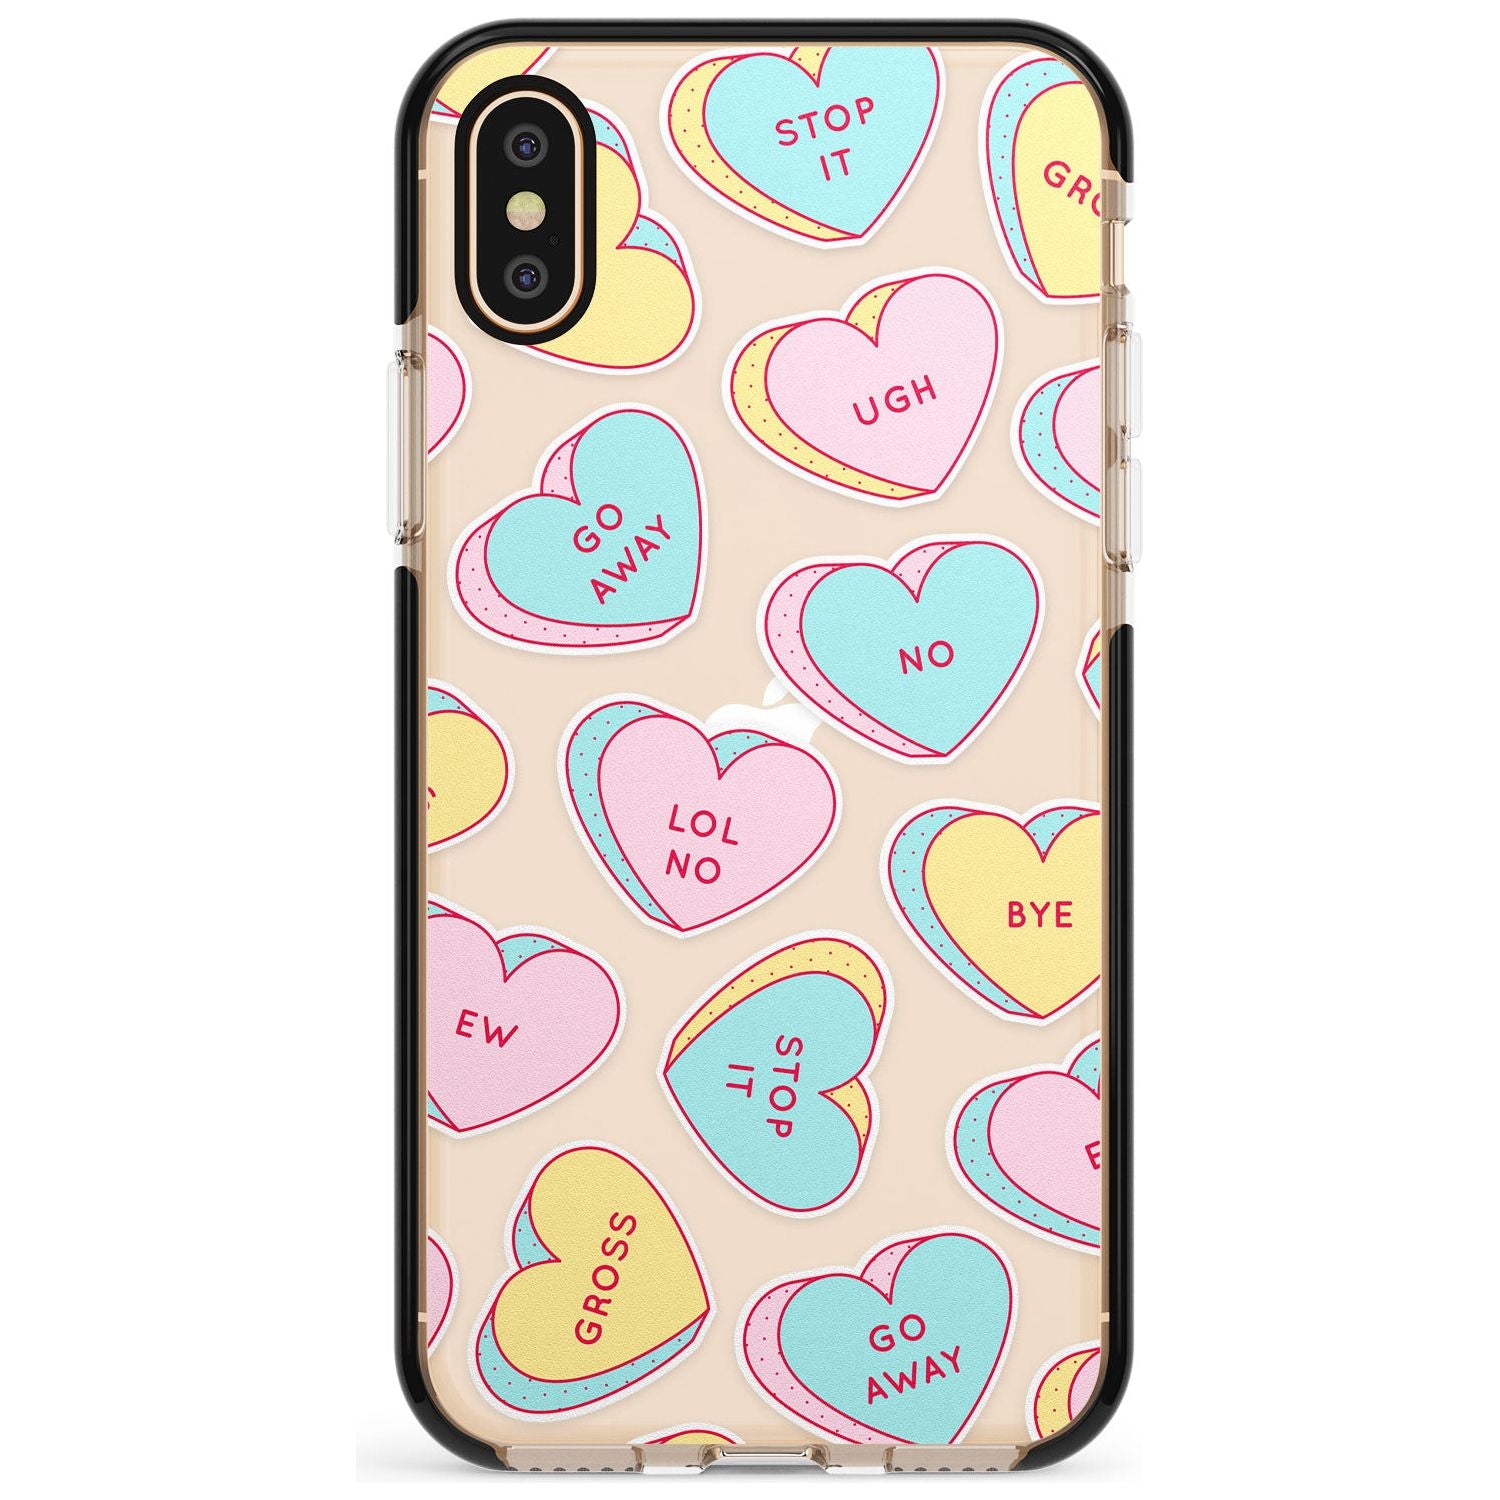 Sarcastic Love Hearts Pink Fade Impact Phone Case for iPhone X XS Max XR